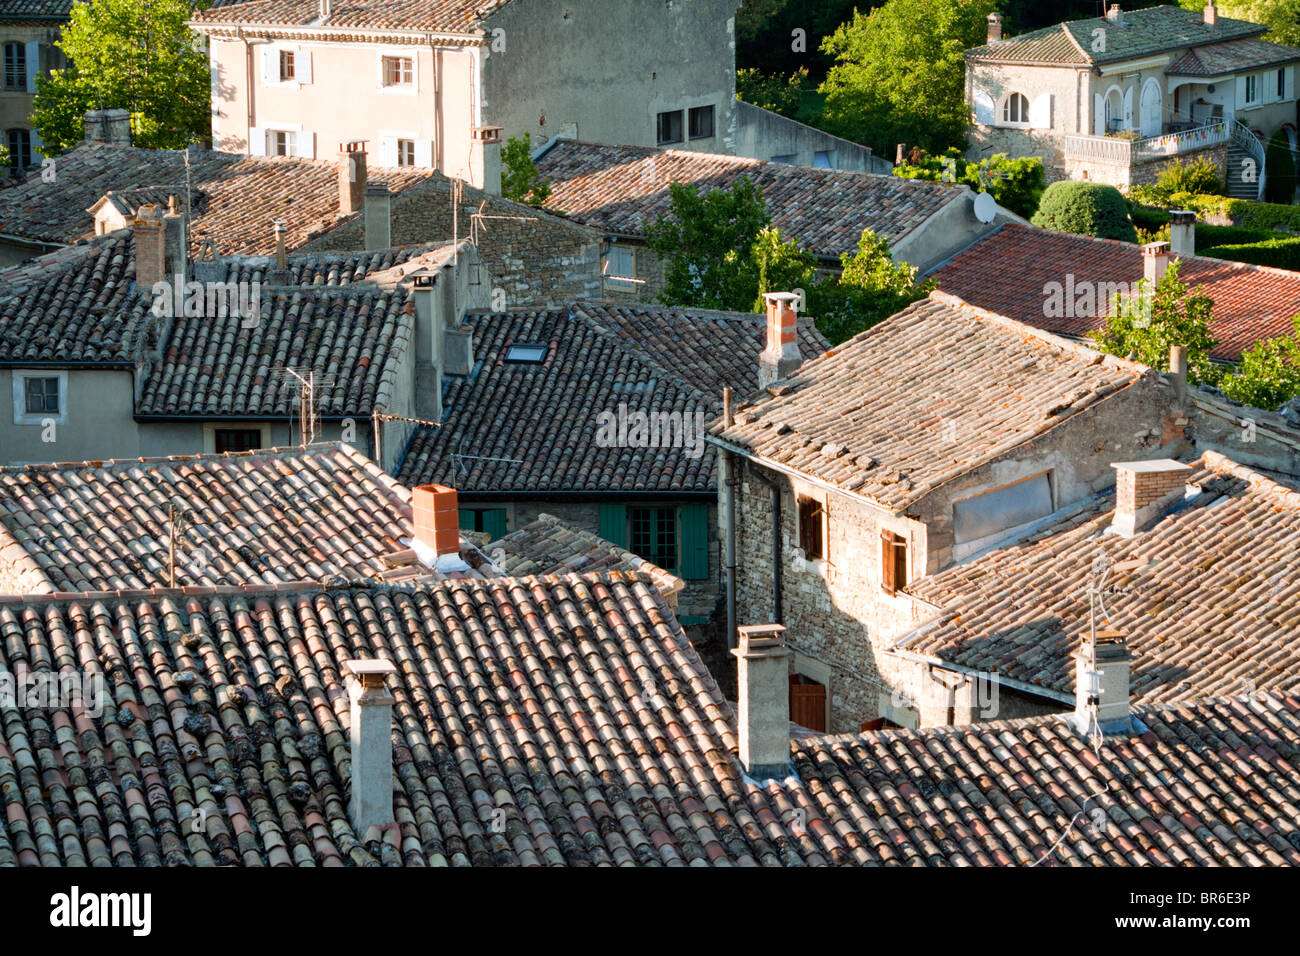 Houses in a small town in France Stock Photo